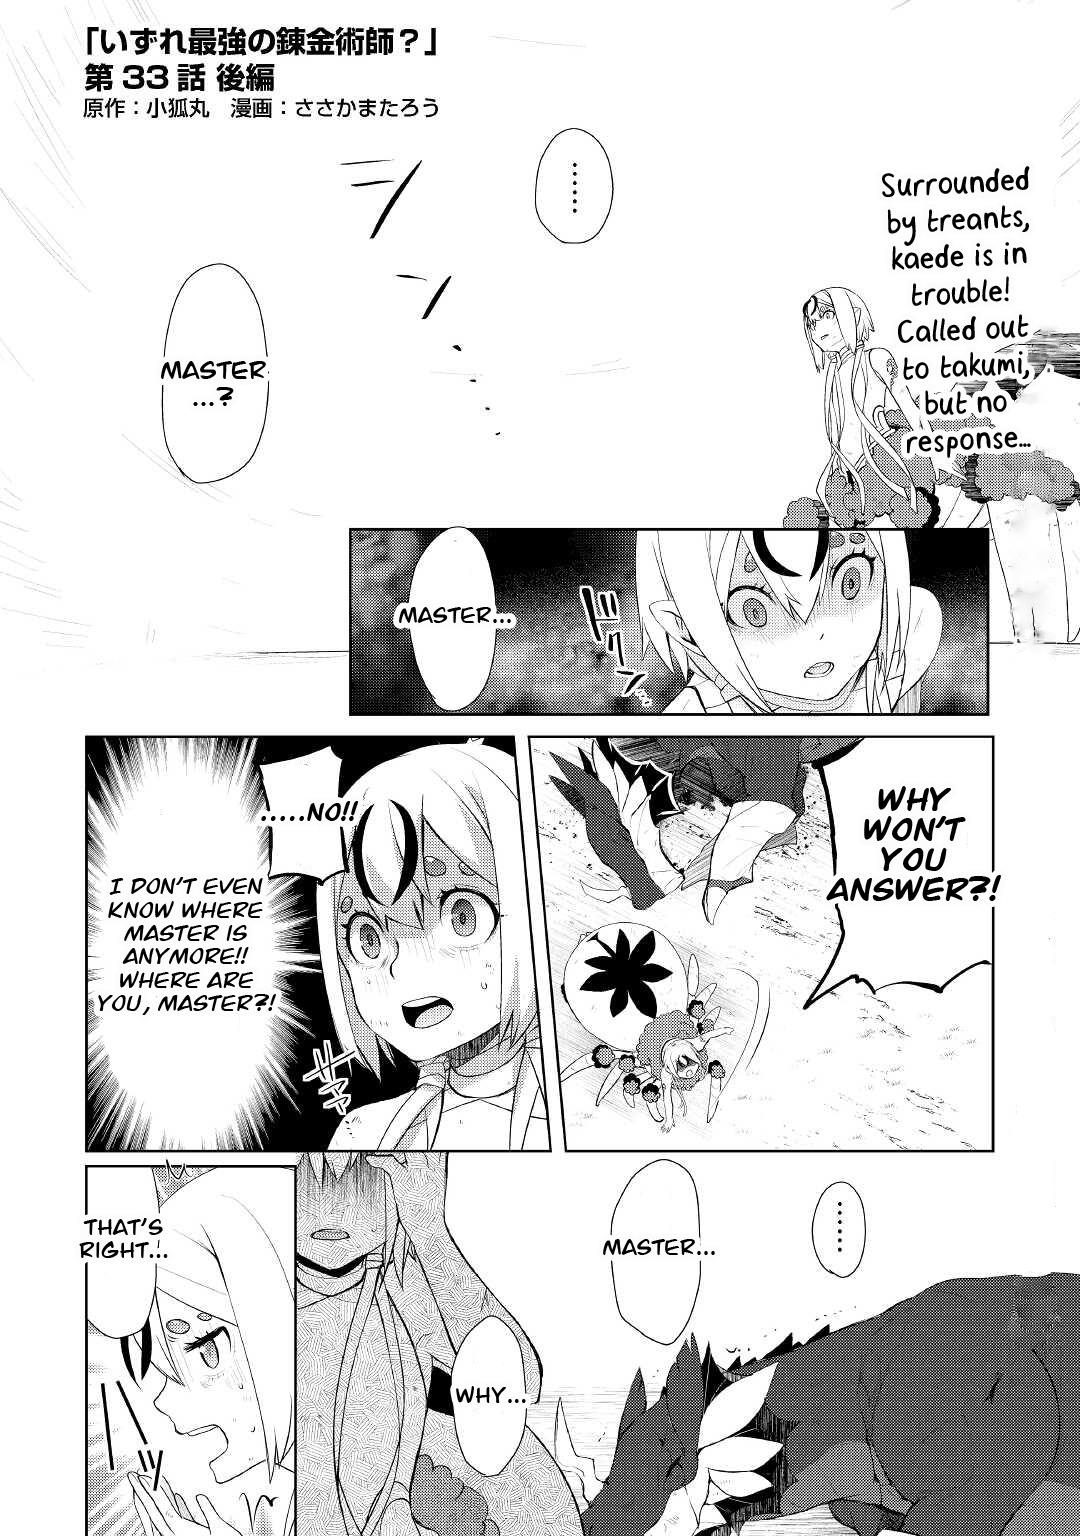 Someday Will I Be The Greatest Alchemist? - Page 1